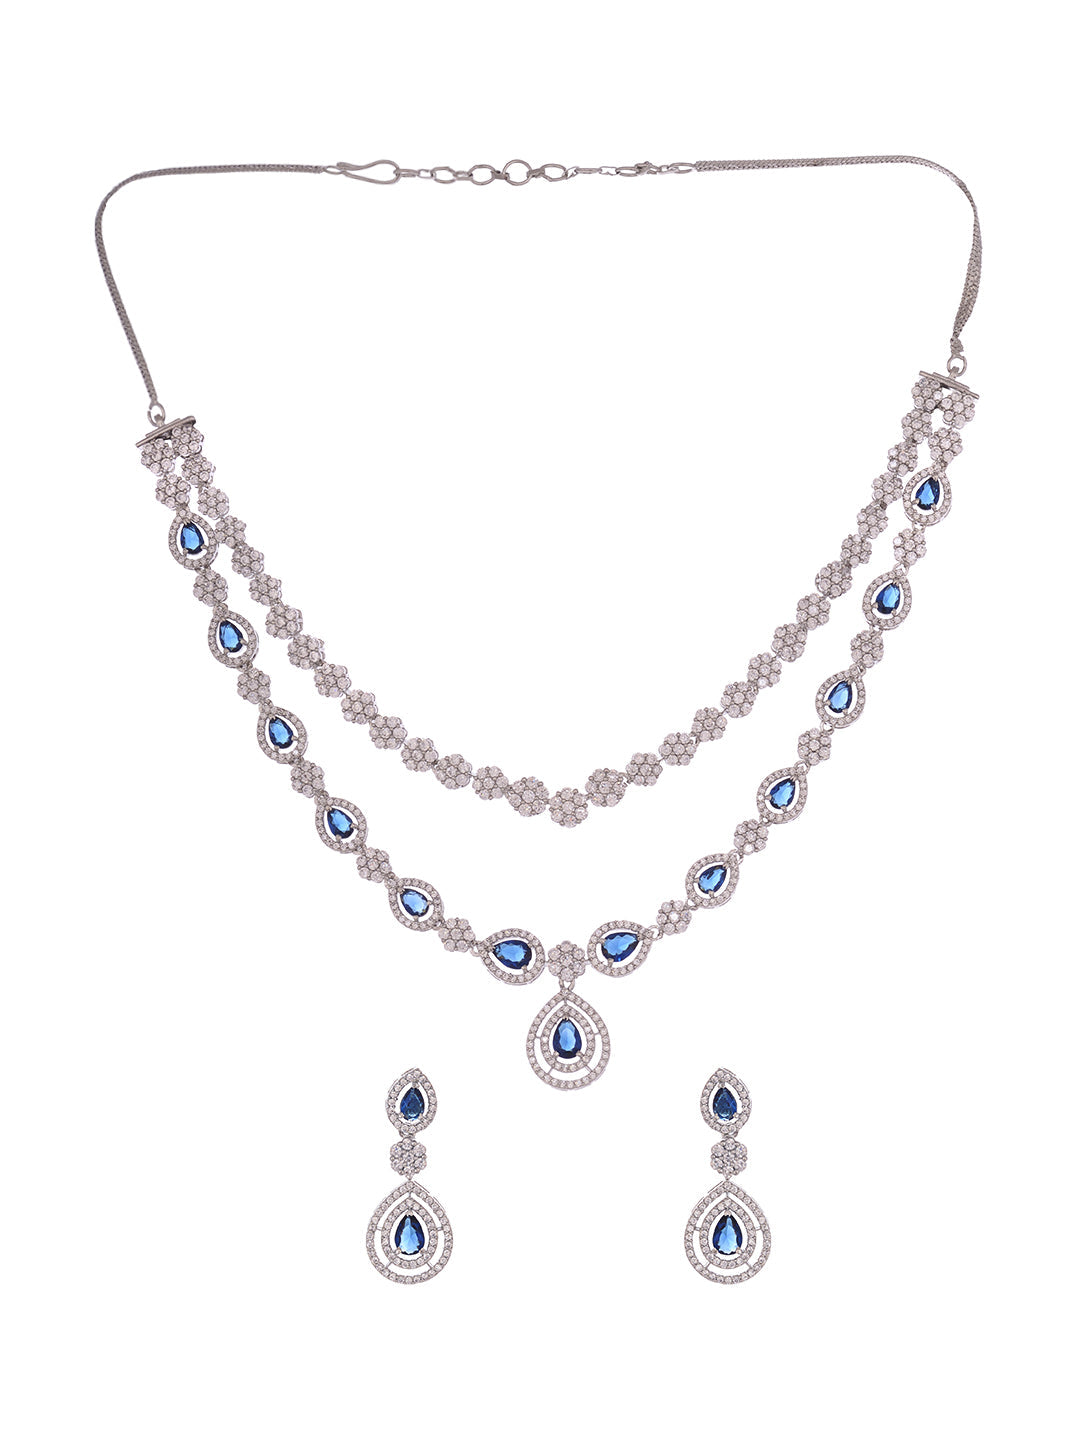 Silver Toned Blue AD studded double layer Necklace jewellery Set, zaveri pearls, sale price rs, sale price, sale gold plated, sale gold, sale, rubans, ring, regular price, priyassi jewellery,